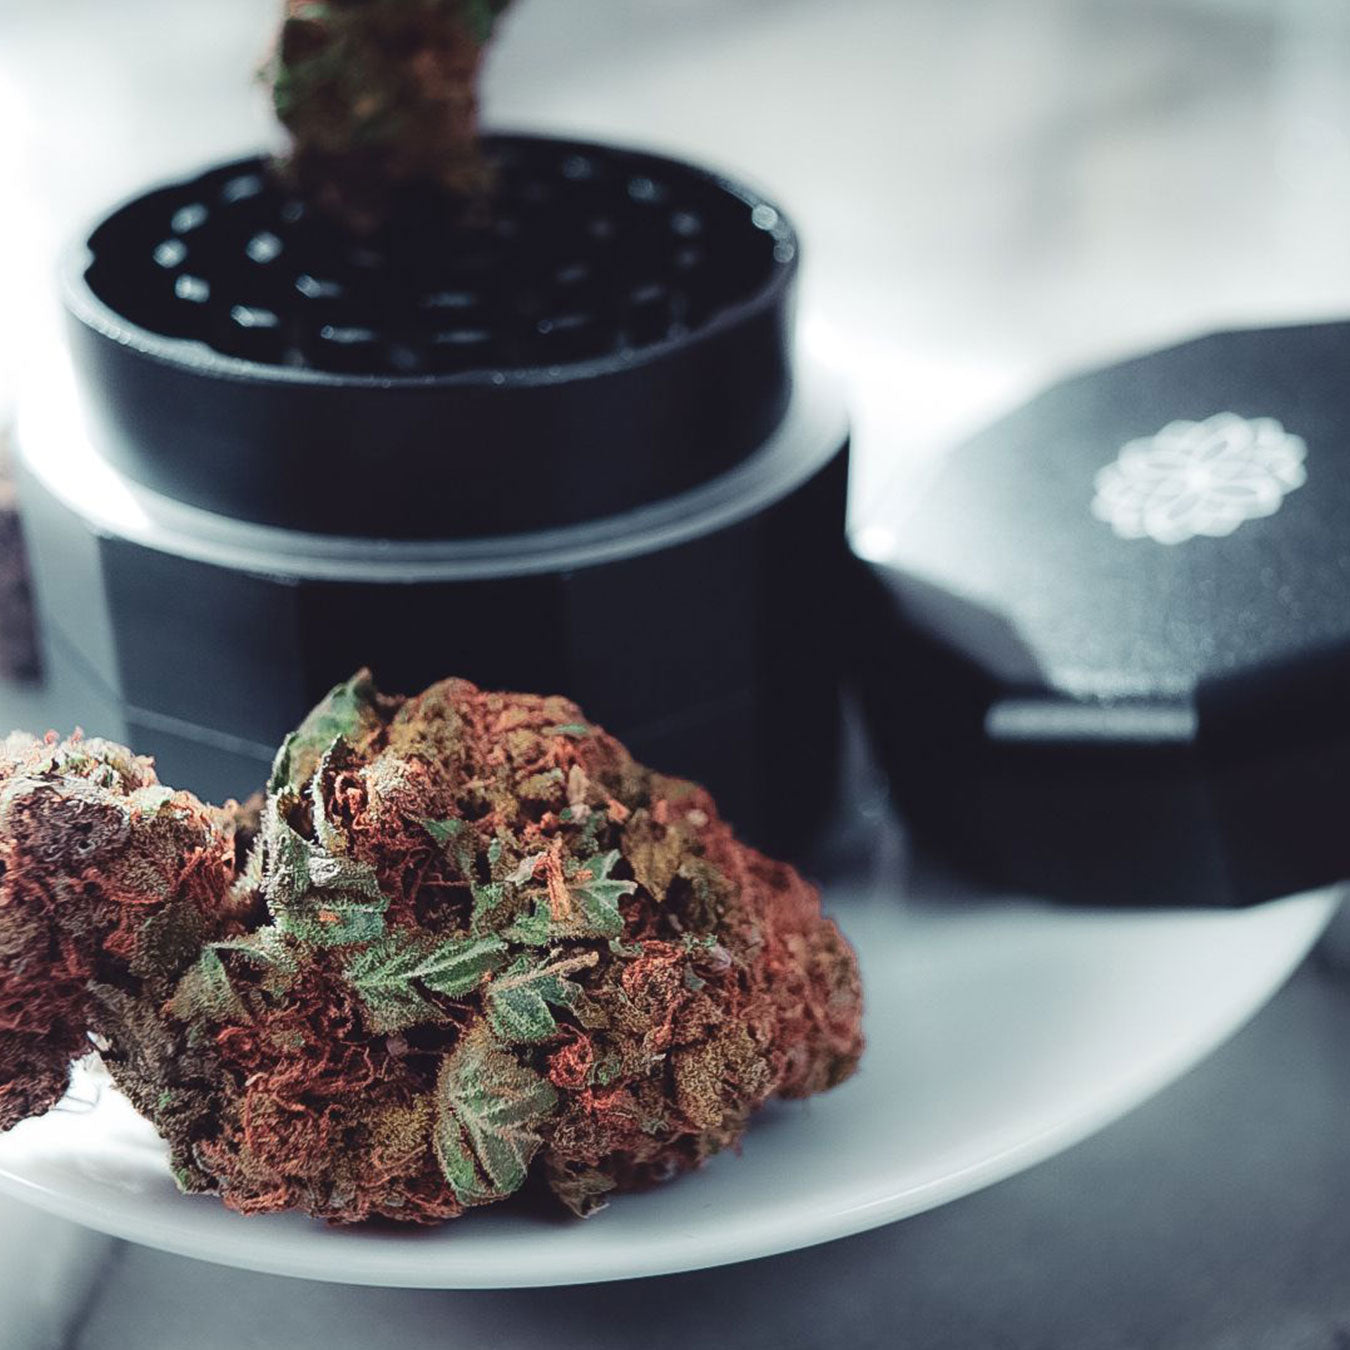 Your Stylish, High-End Tool The Best Weed Grinder Online